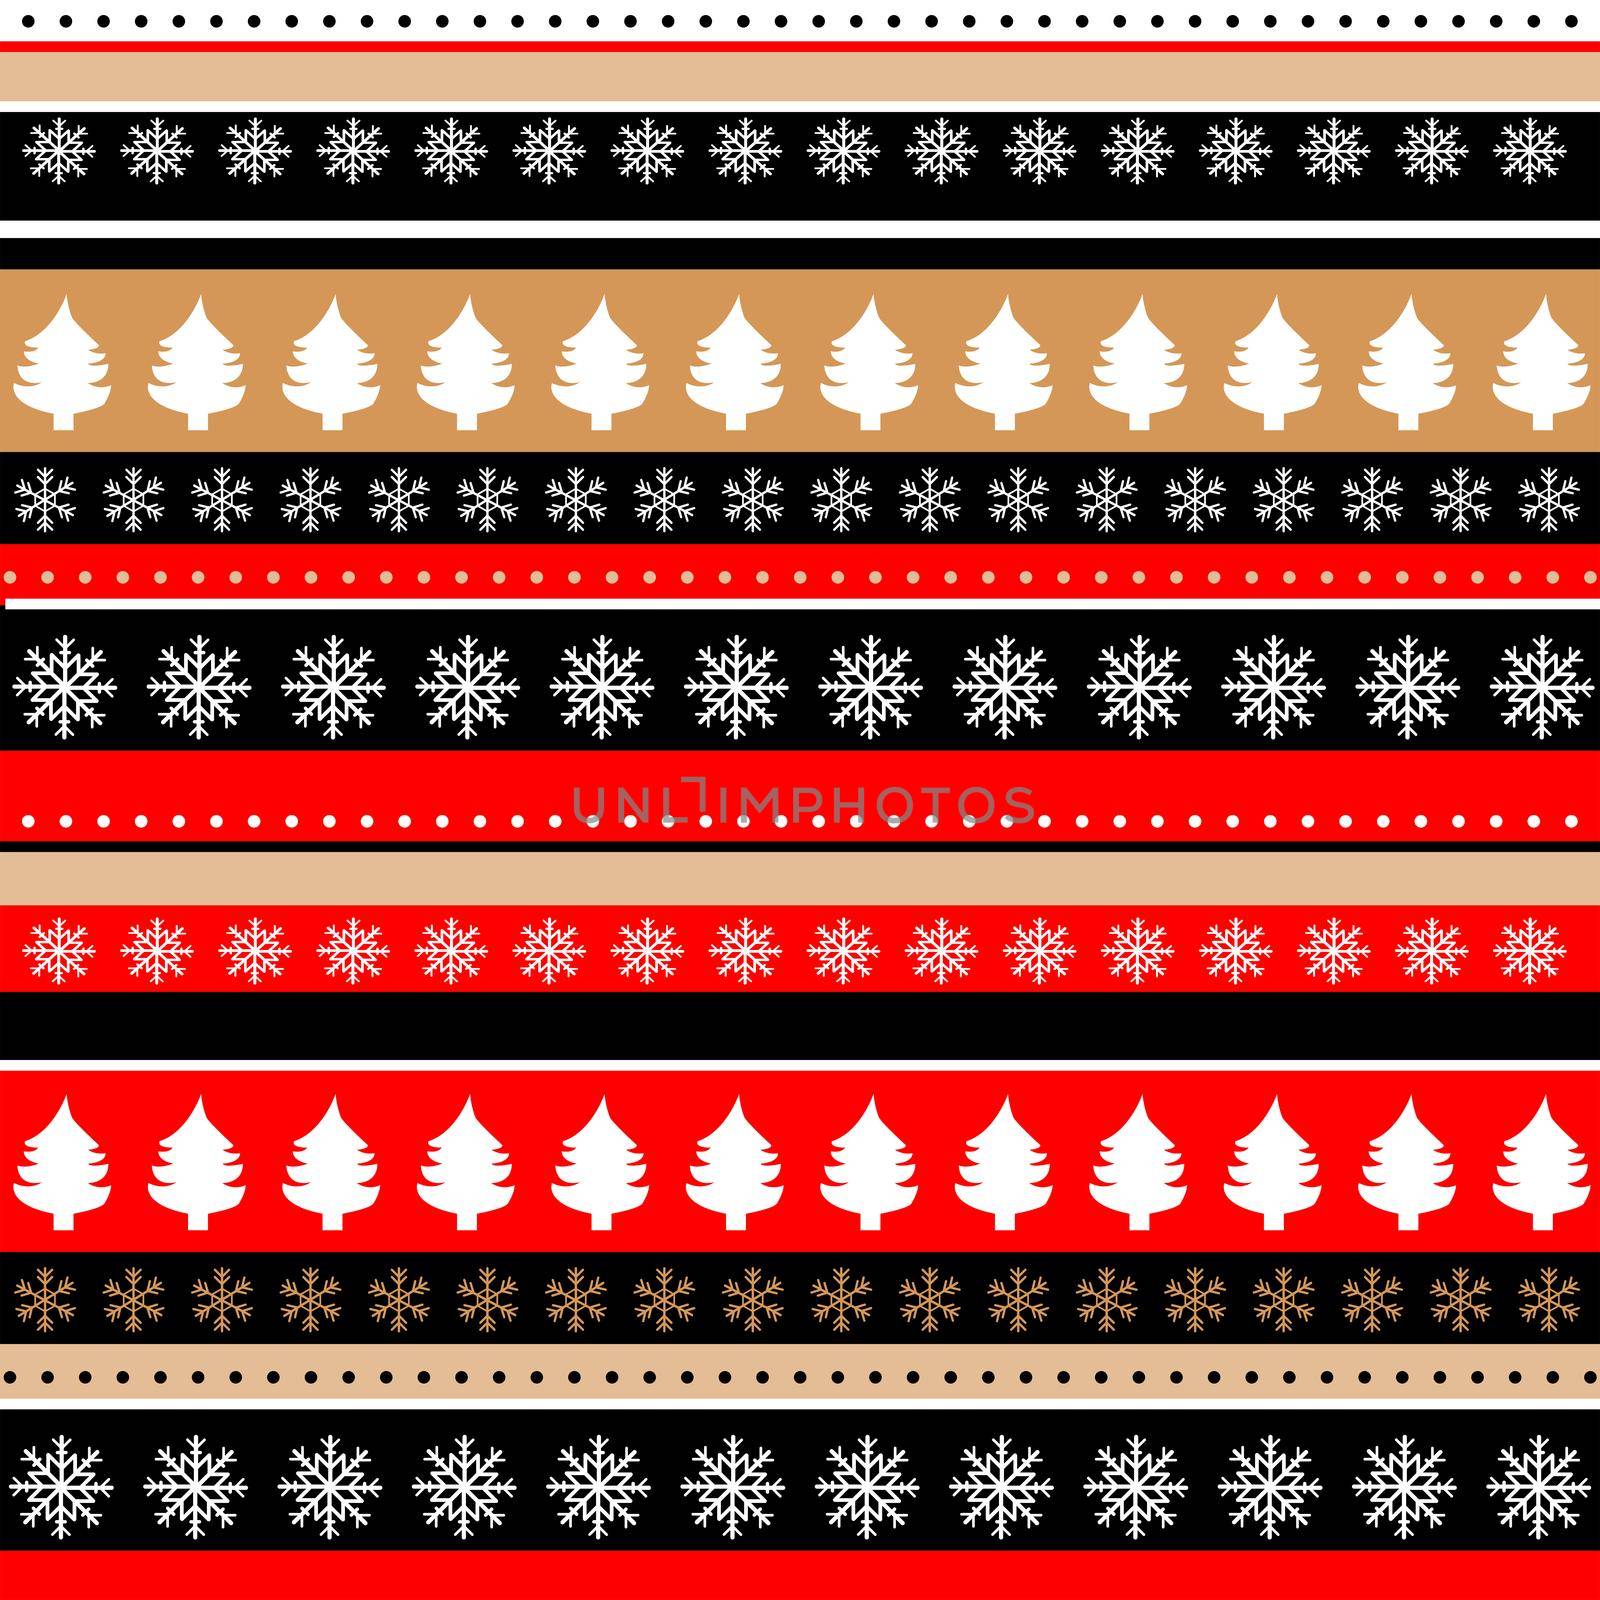 Christmas symbols background for web, wallpaper, wrapping paper, packaging,gifts and decorations. by hibrida13